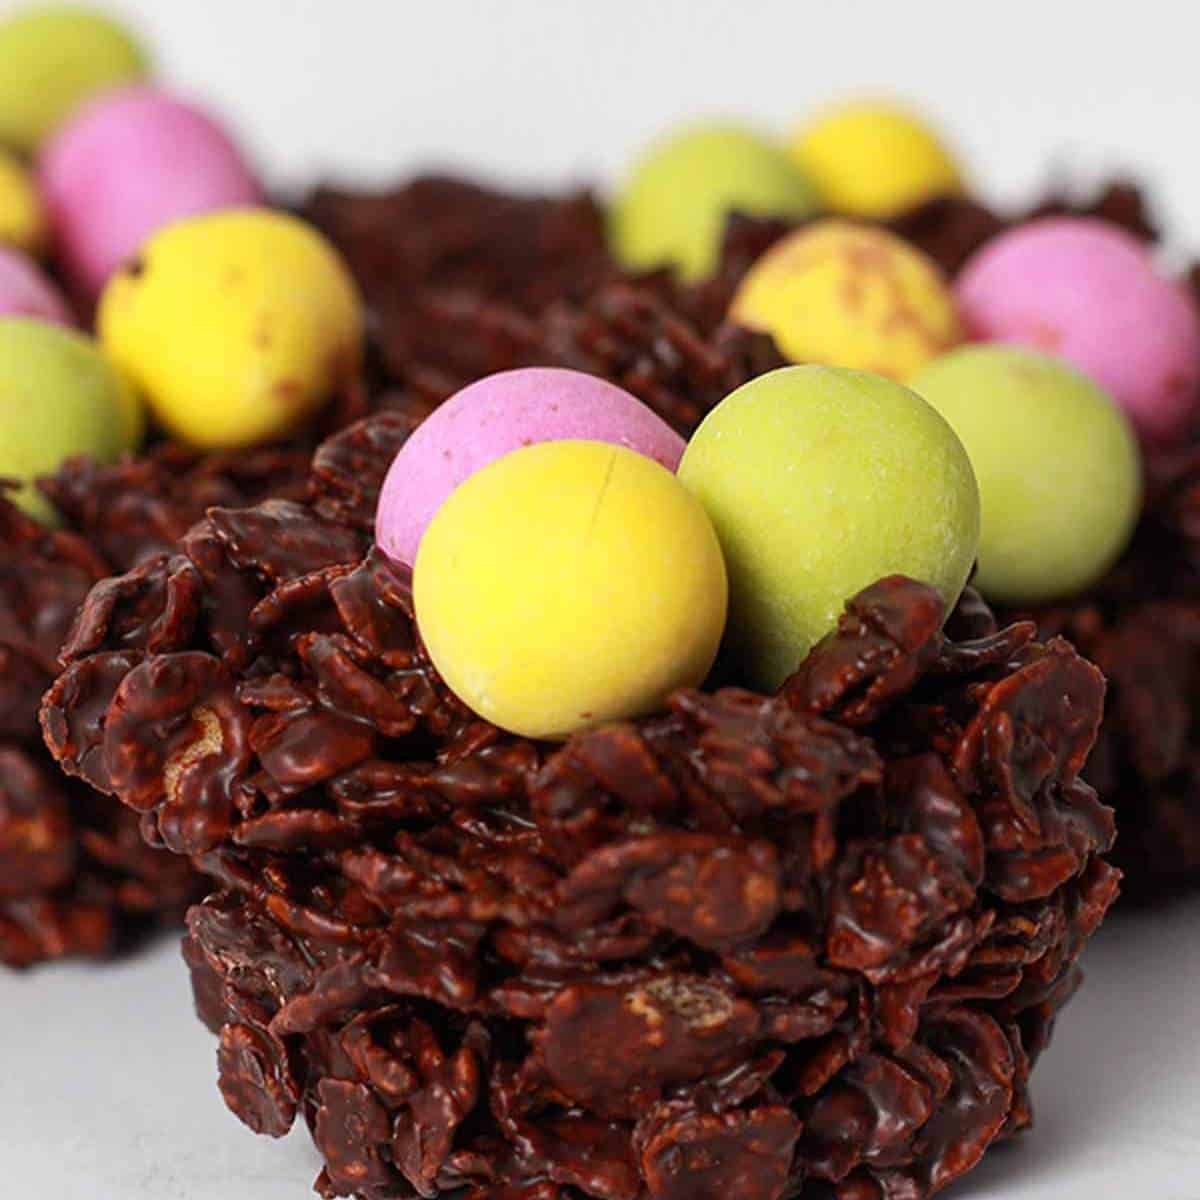 cornflake nests of chocolate holding little candy eggs.